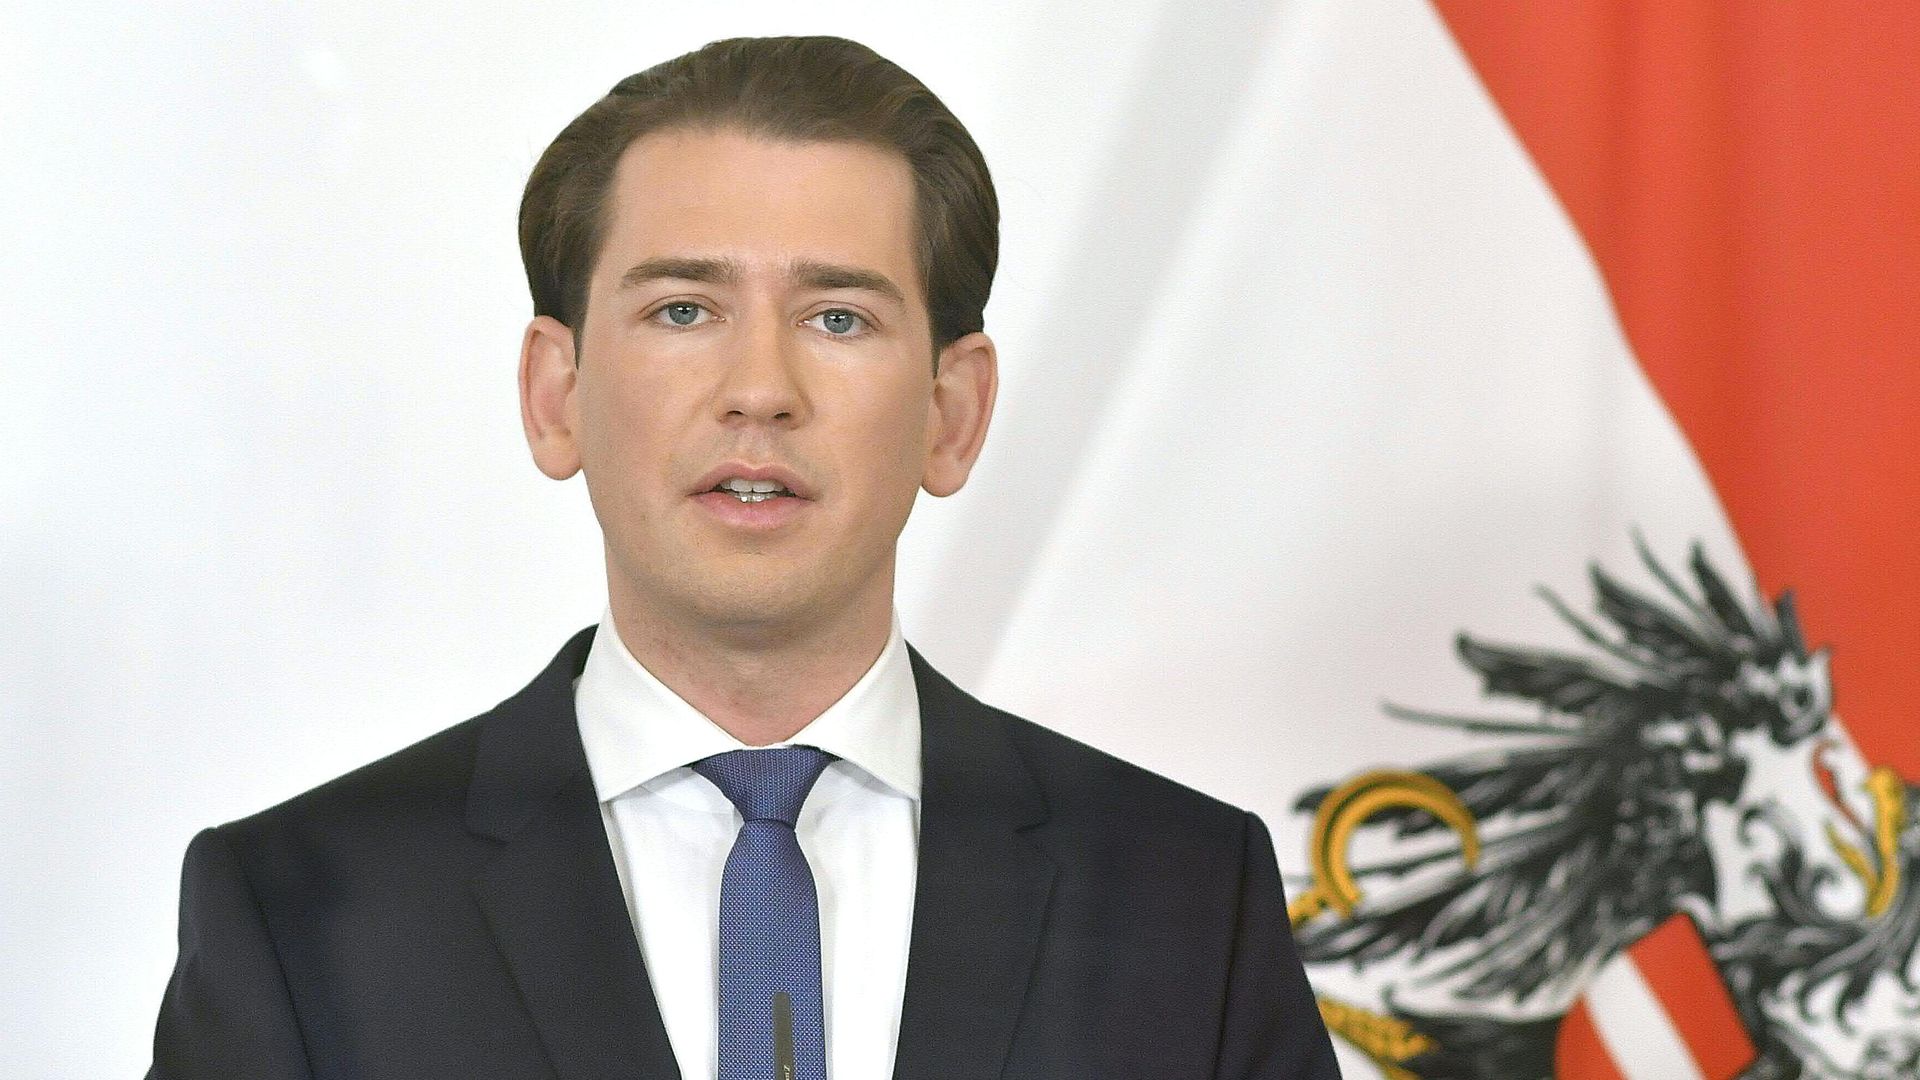 Austria's Chancellor Sebastian Kurz addresses journalists on November 14, 2020 in Vienna to comment on new restrictions taken to limit the spread of the novel coronavirus